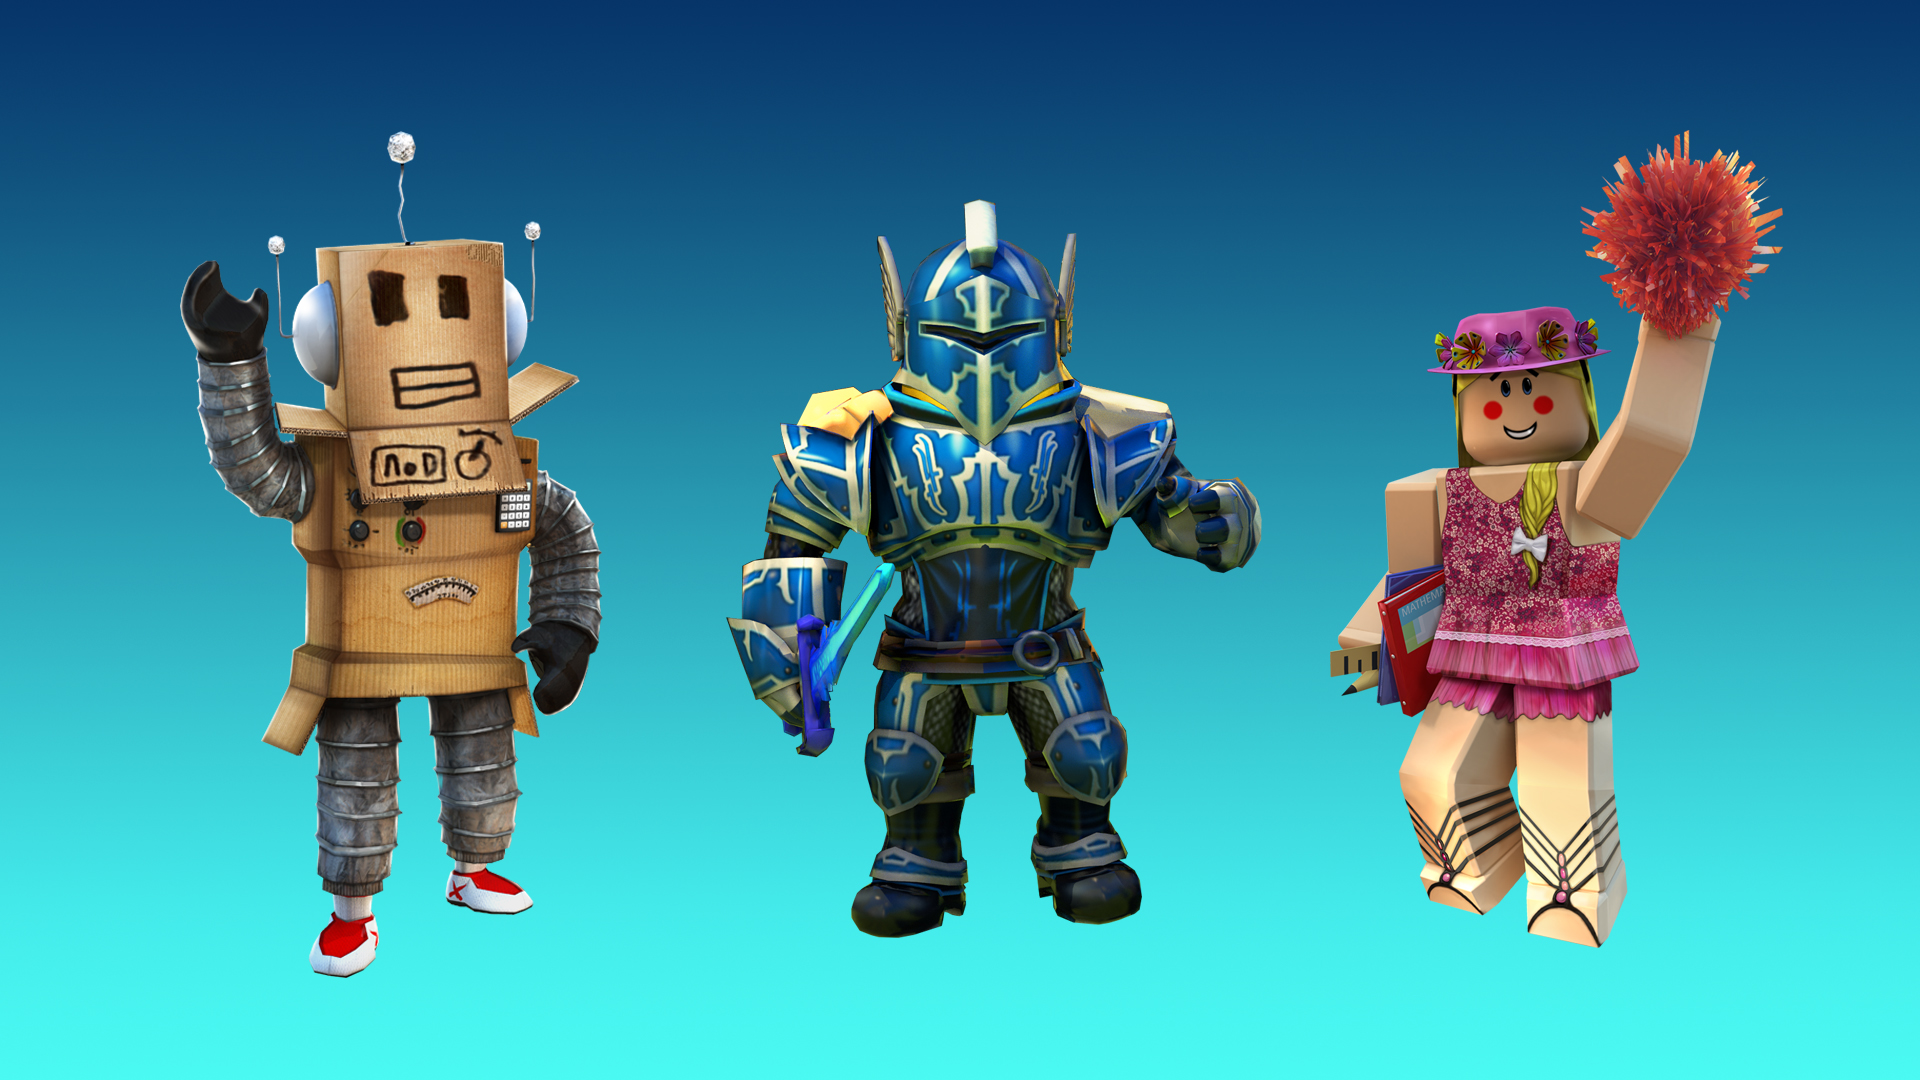 Download Roblox wallpapers for mobile phone, free Roblox HD